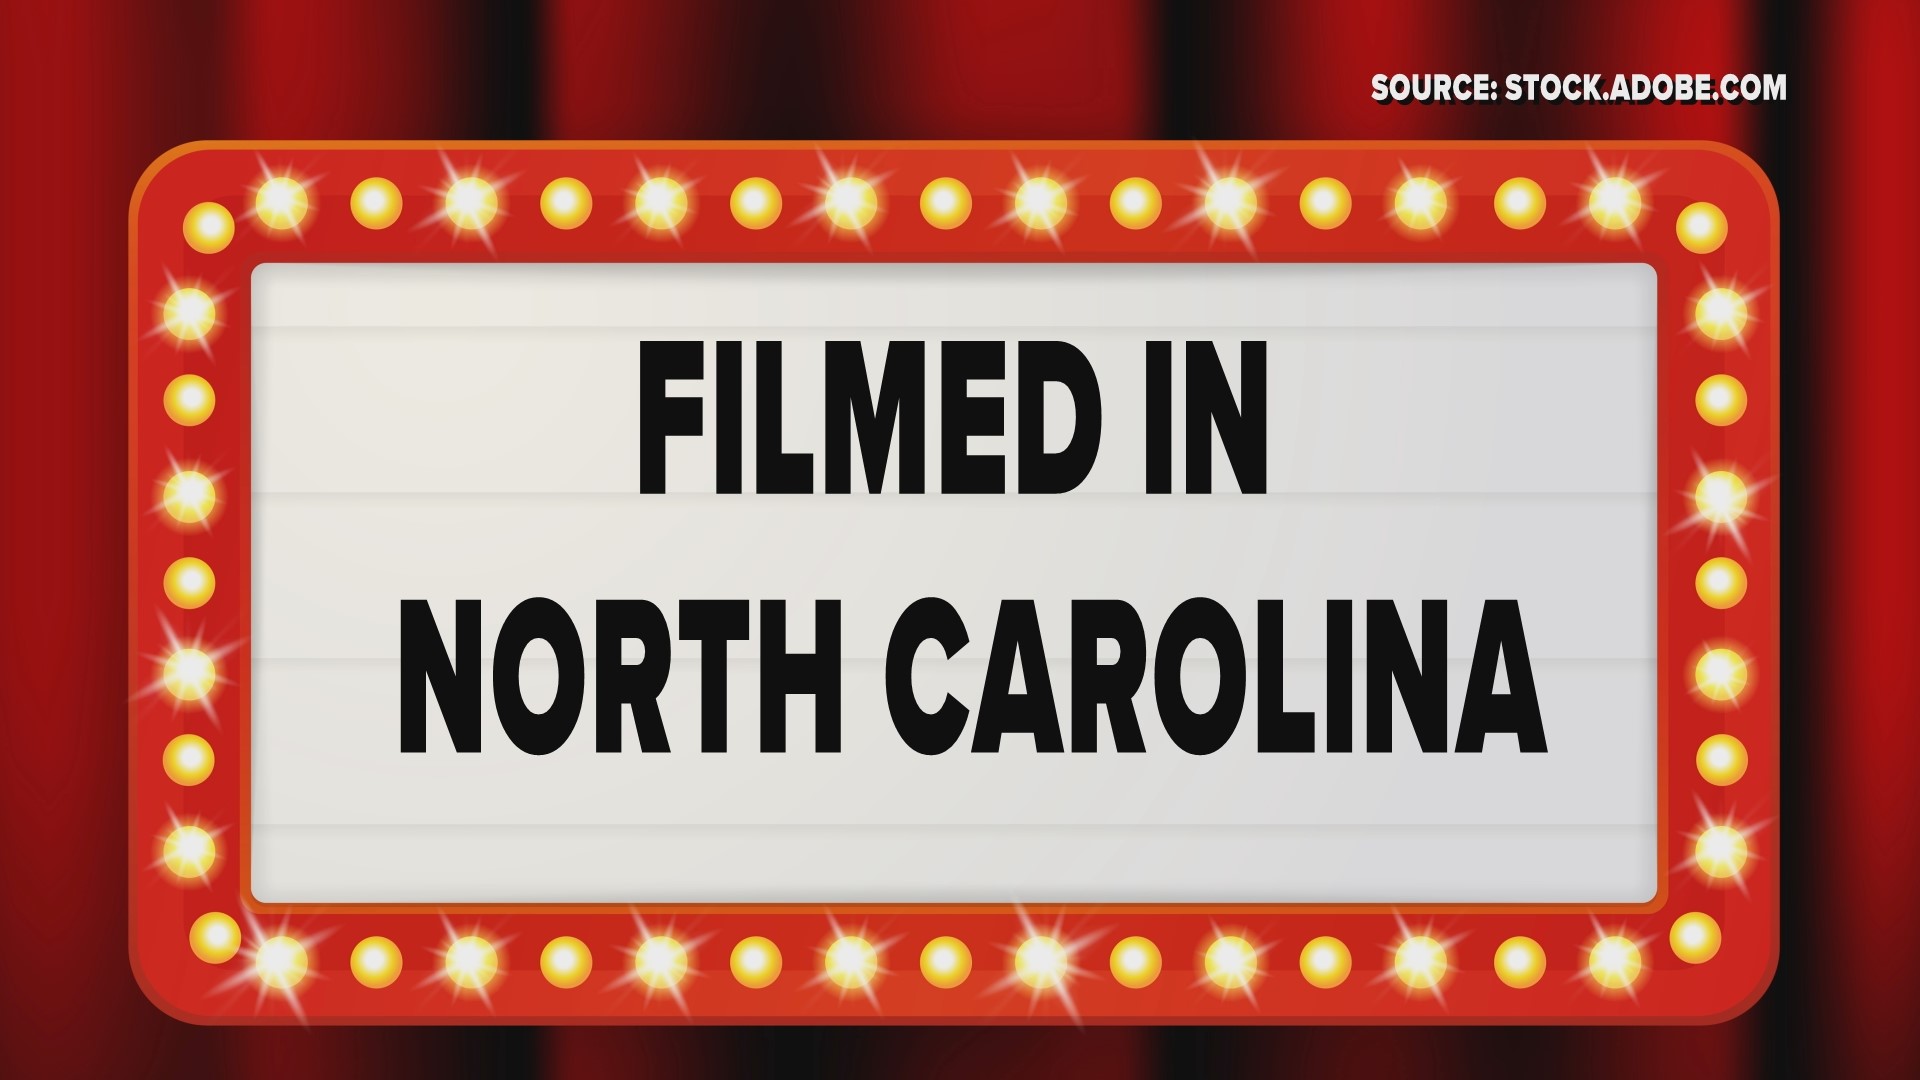 North Carolina has become filled with film sets. In 2022, productions spent more than $258 million in the state.